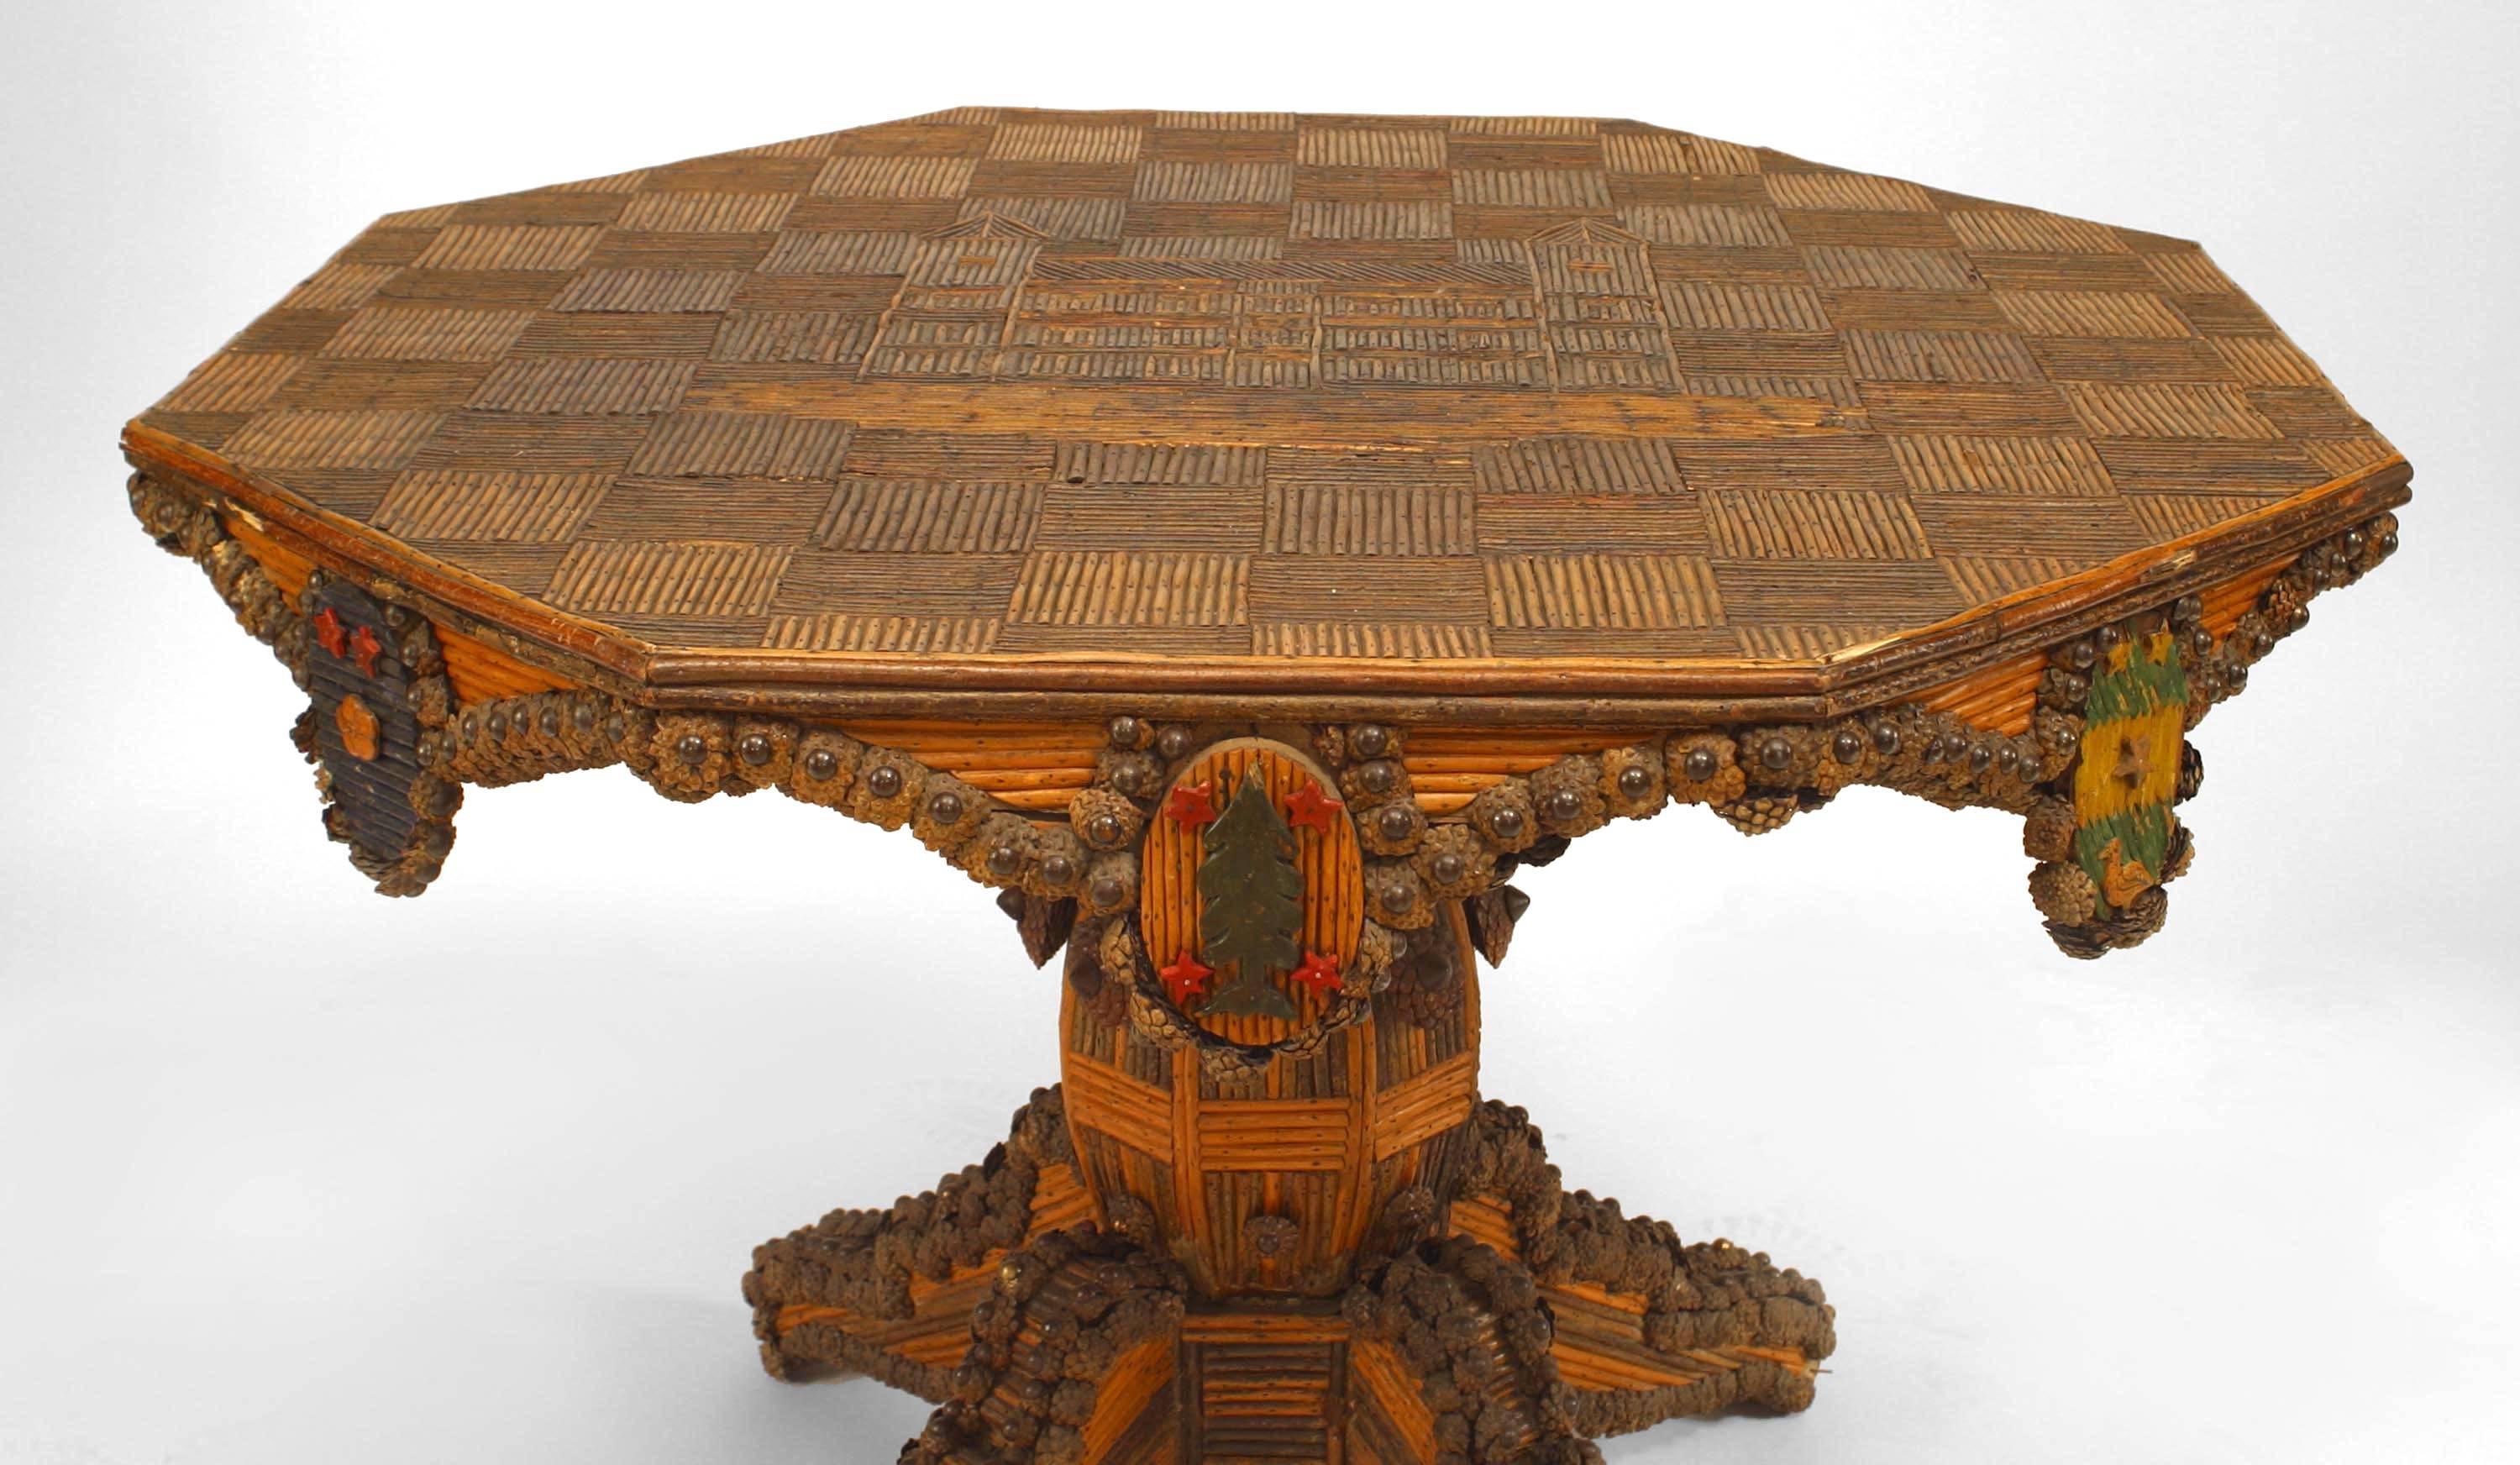 Rustic Continental French (19th Century) slat twig design pedestal base center table with inlaid design of castle on octagonal top and medallions on apron with small pine cone trim.
